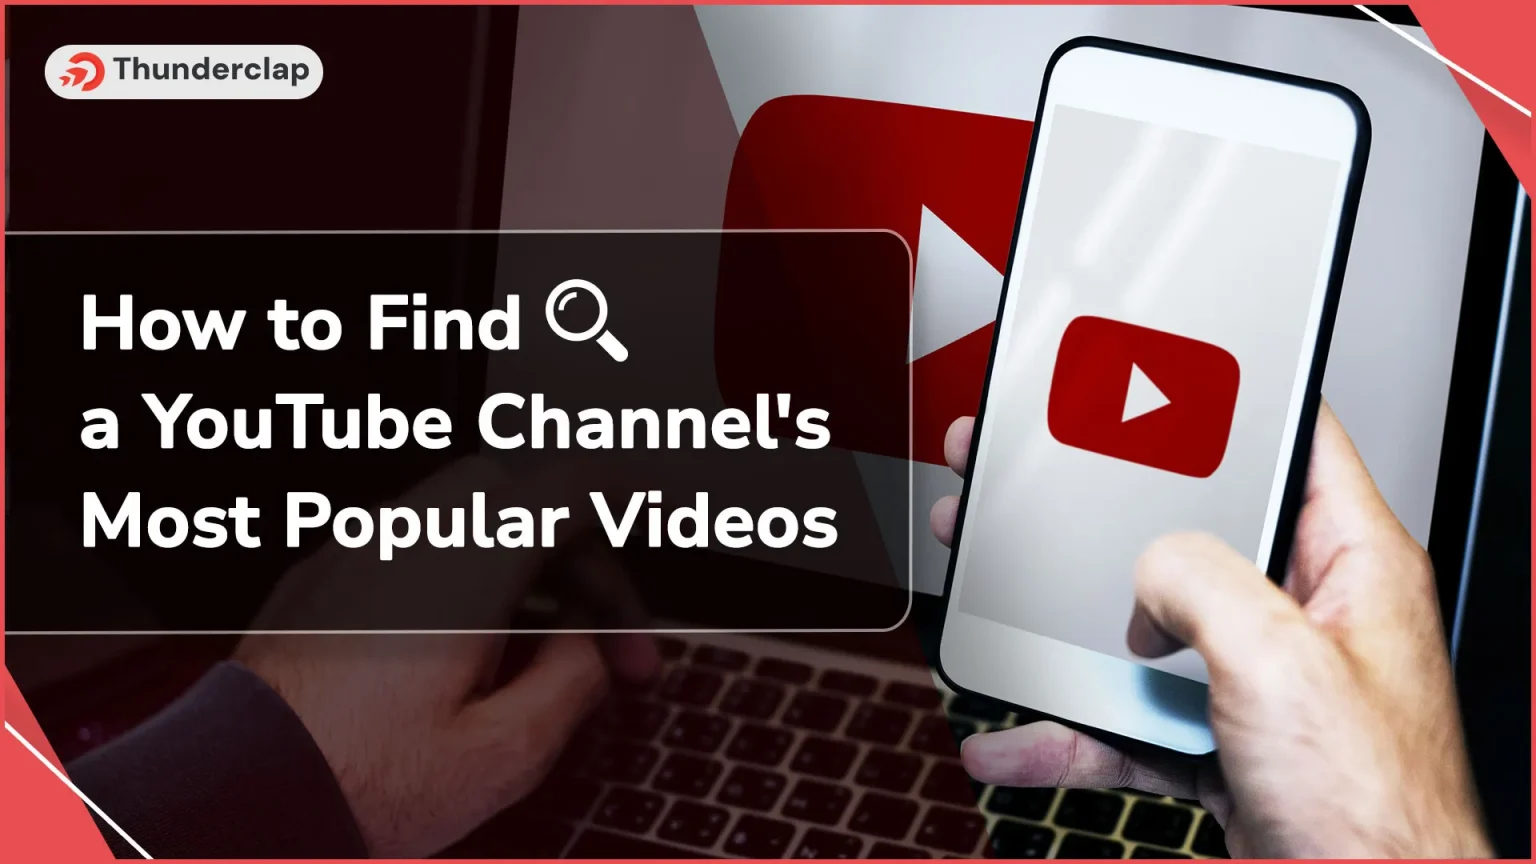 How To Find A YouTube Channel’s Most Popular Videos